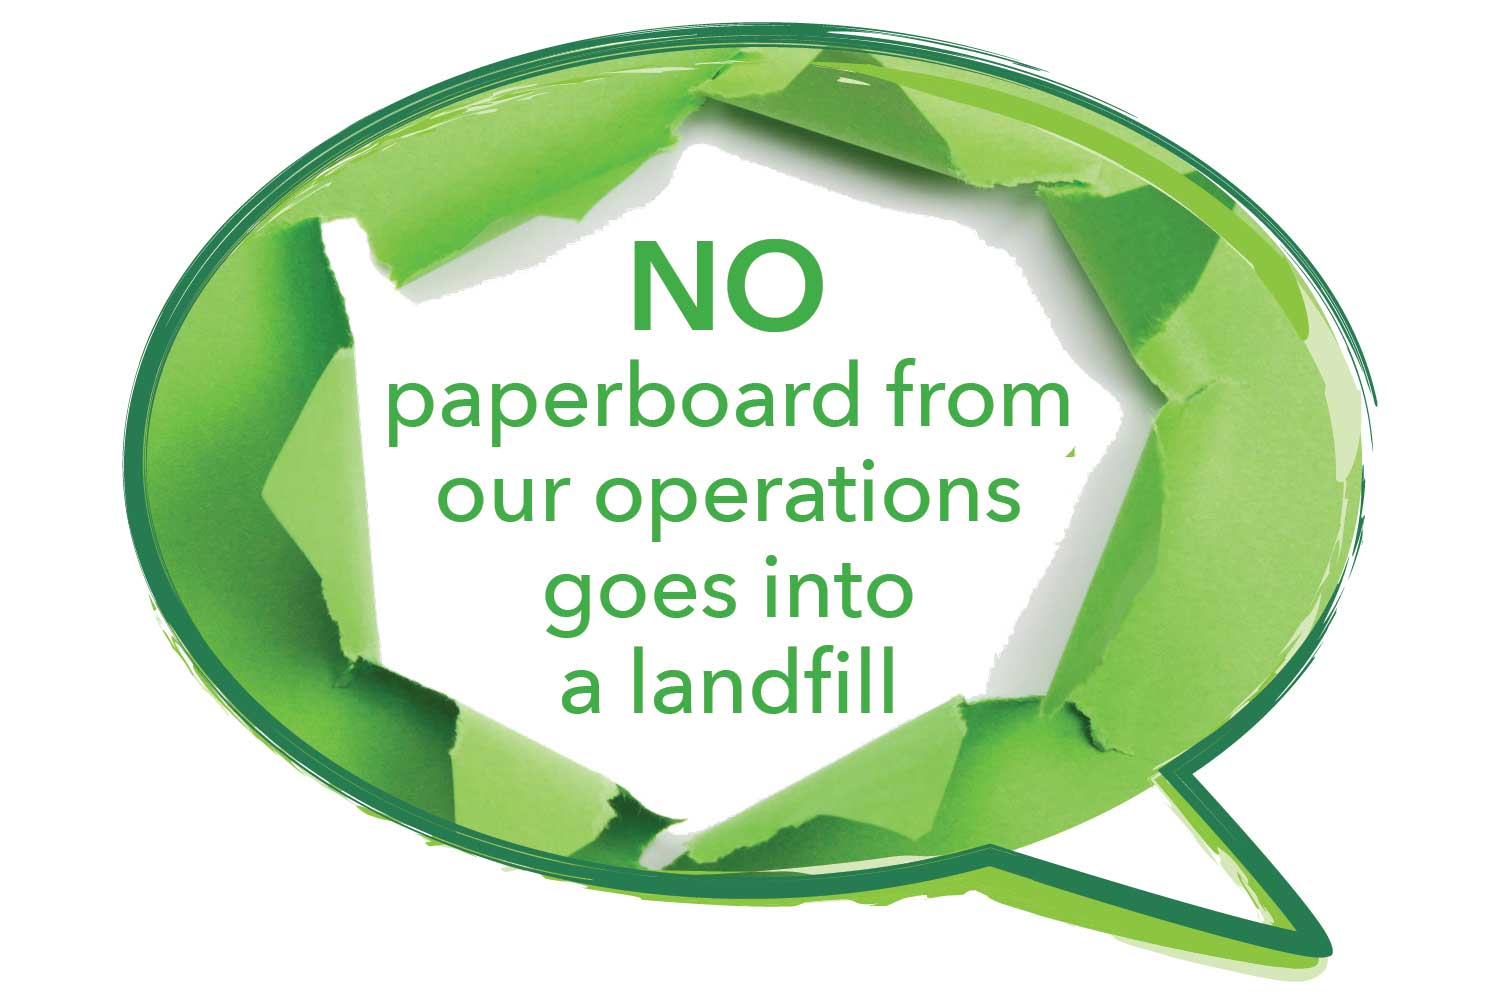 No paperboard from our operations goes into a landfill